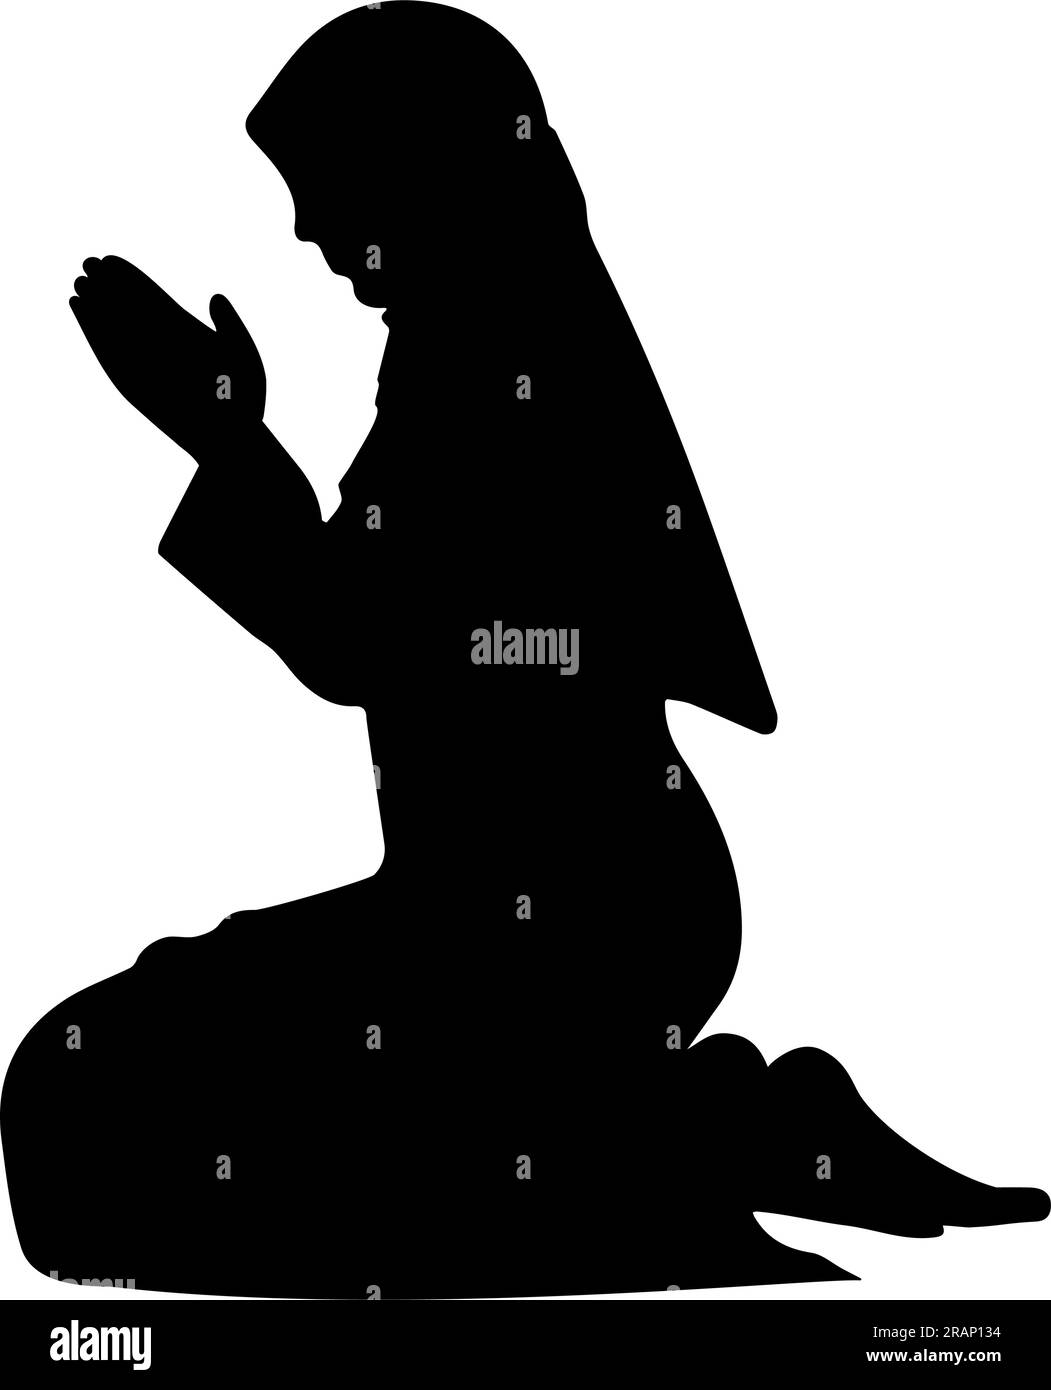 Muslim woman praying silhouette isolated on white background. Vector ...